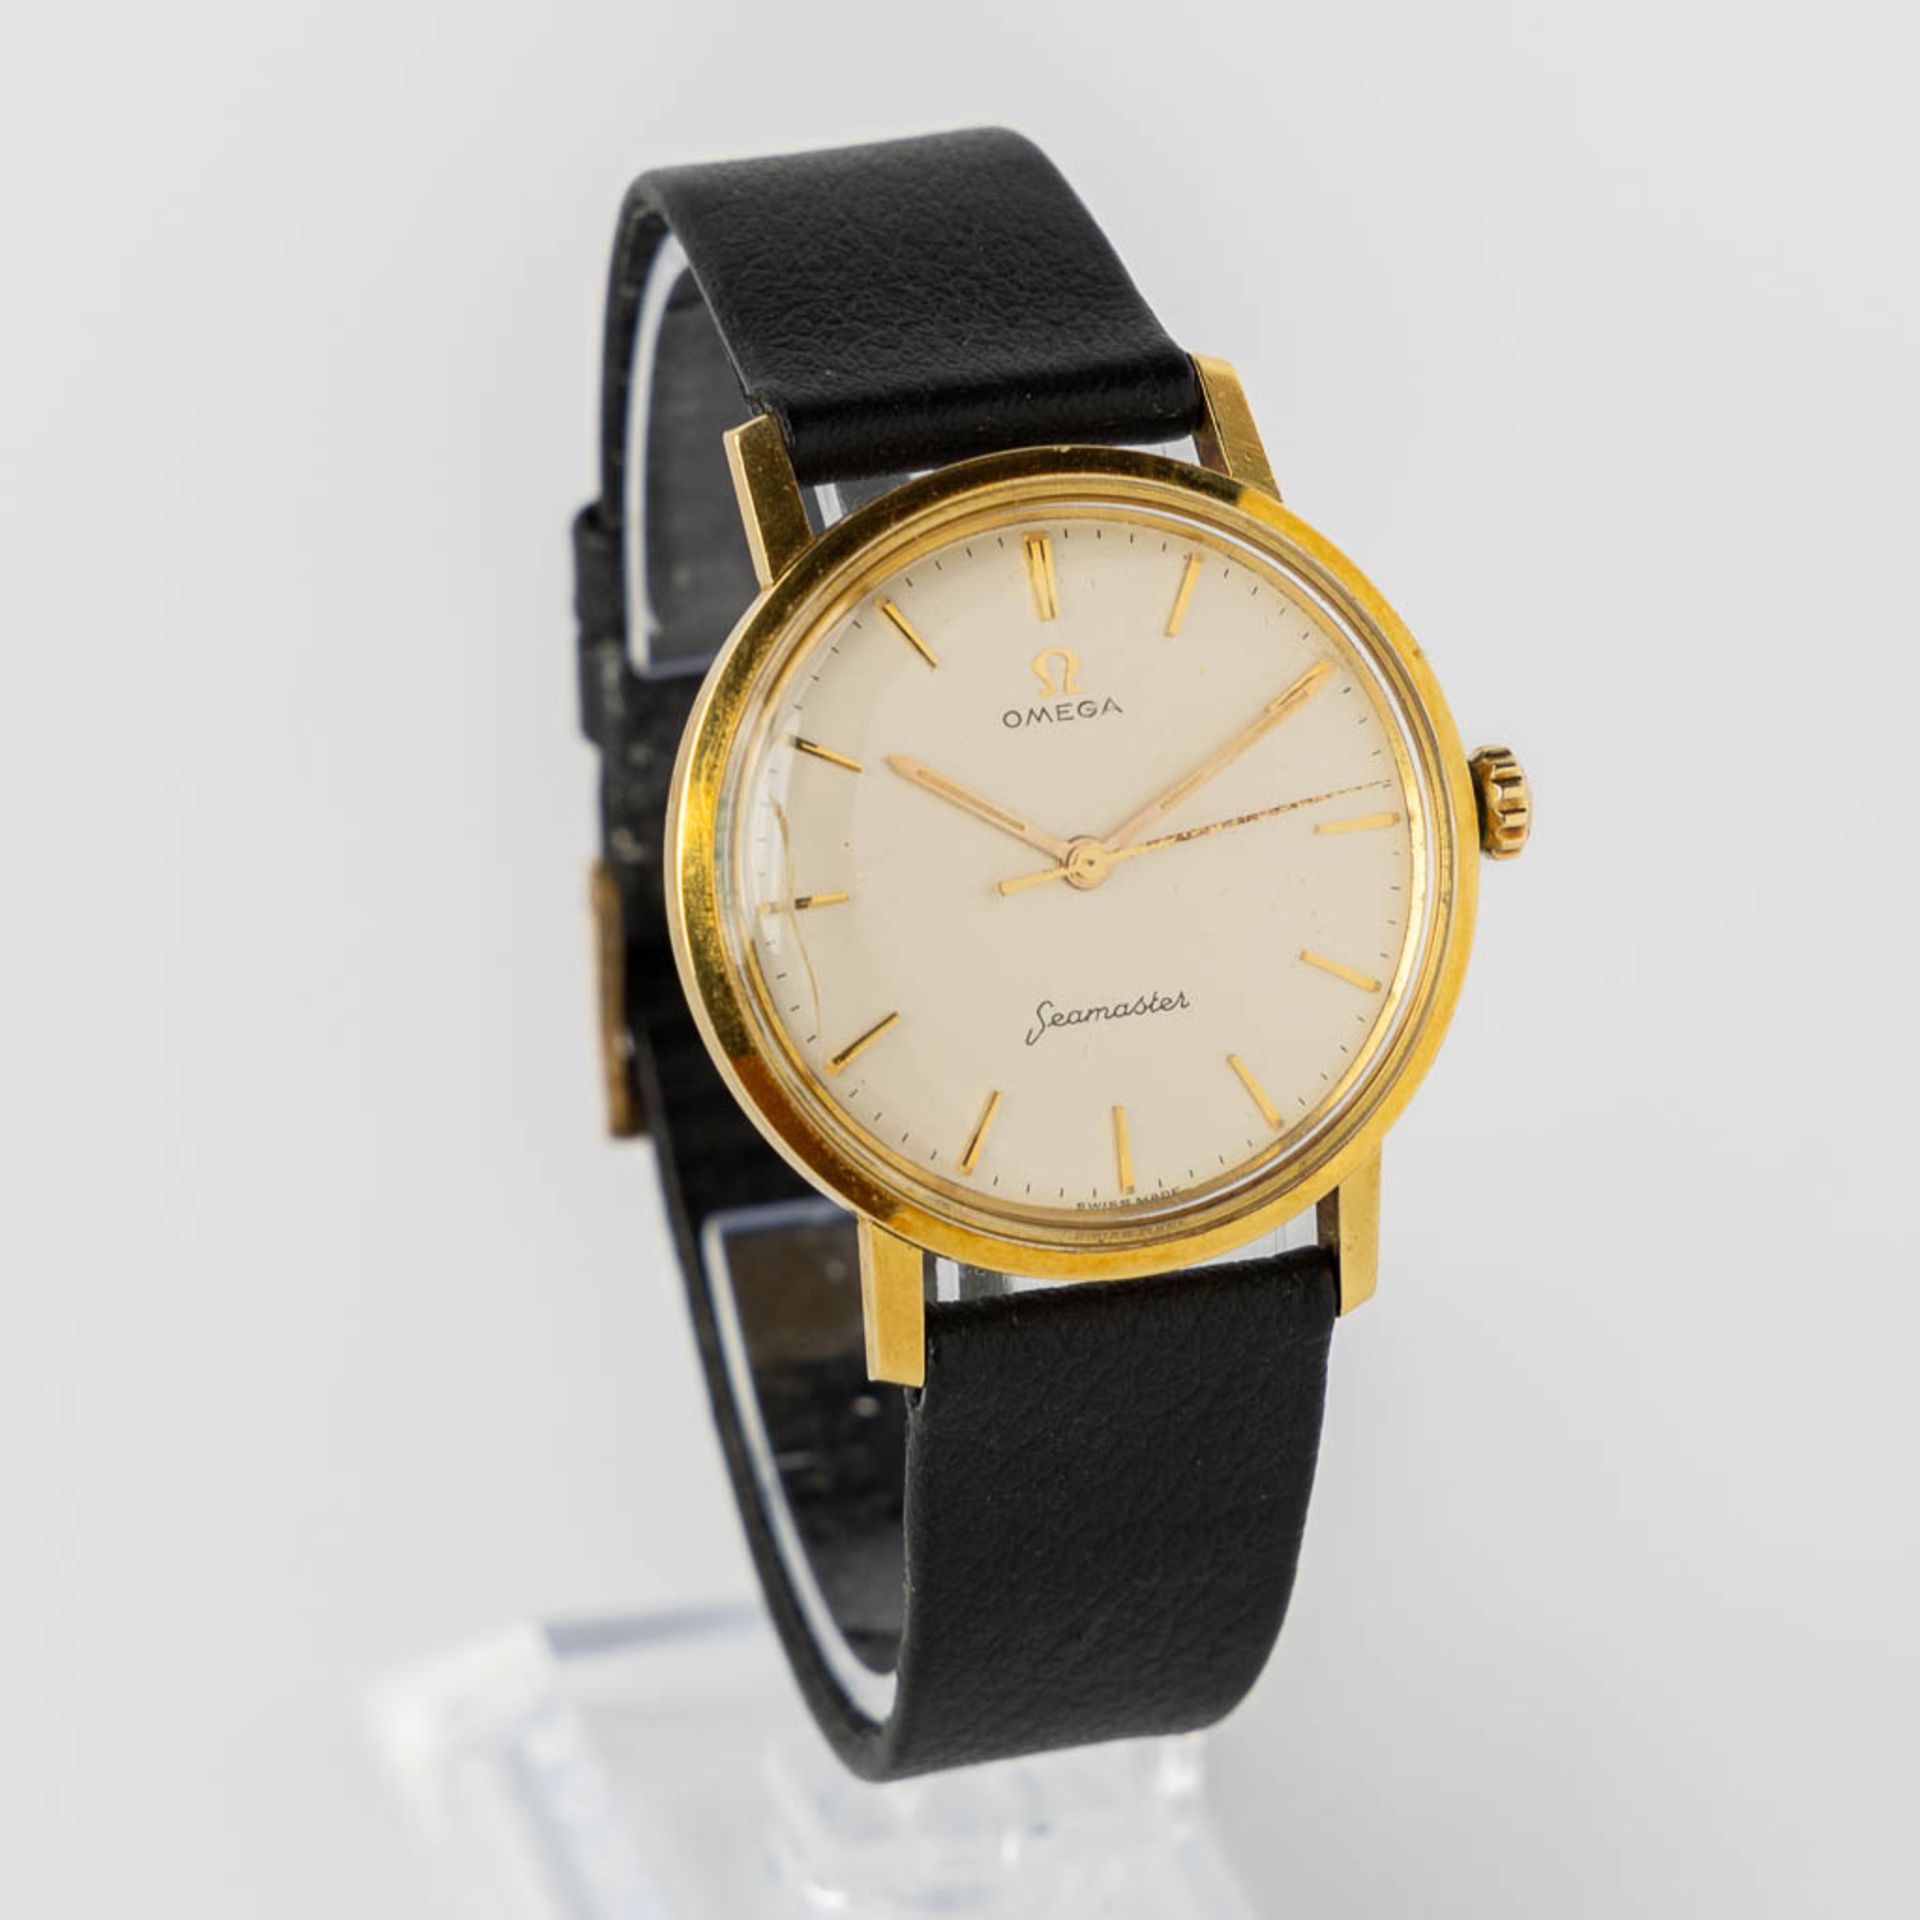 Omega Seamaster, a vintage men's wristwatch, 18kt yellow gold, waterproof case. 34mm. (D:3,4 cm) - Image 9 of 9